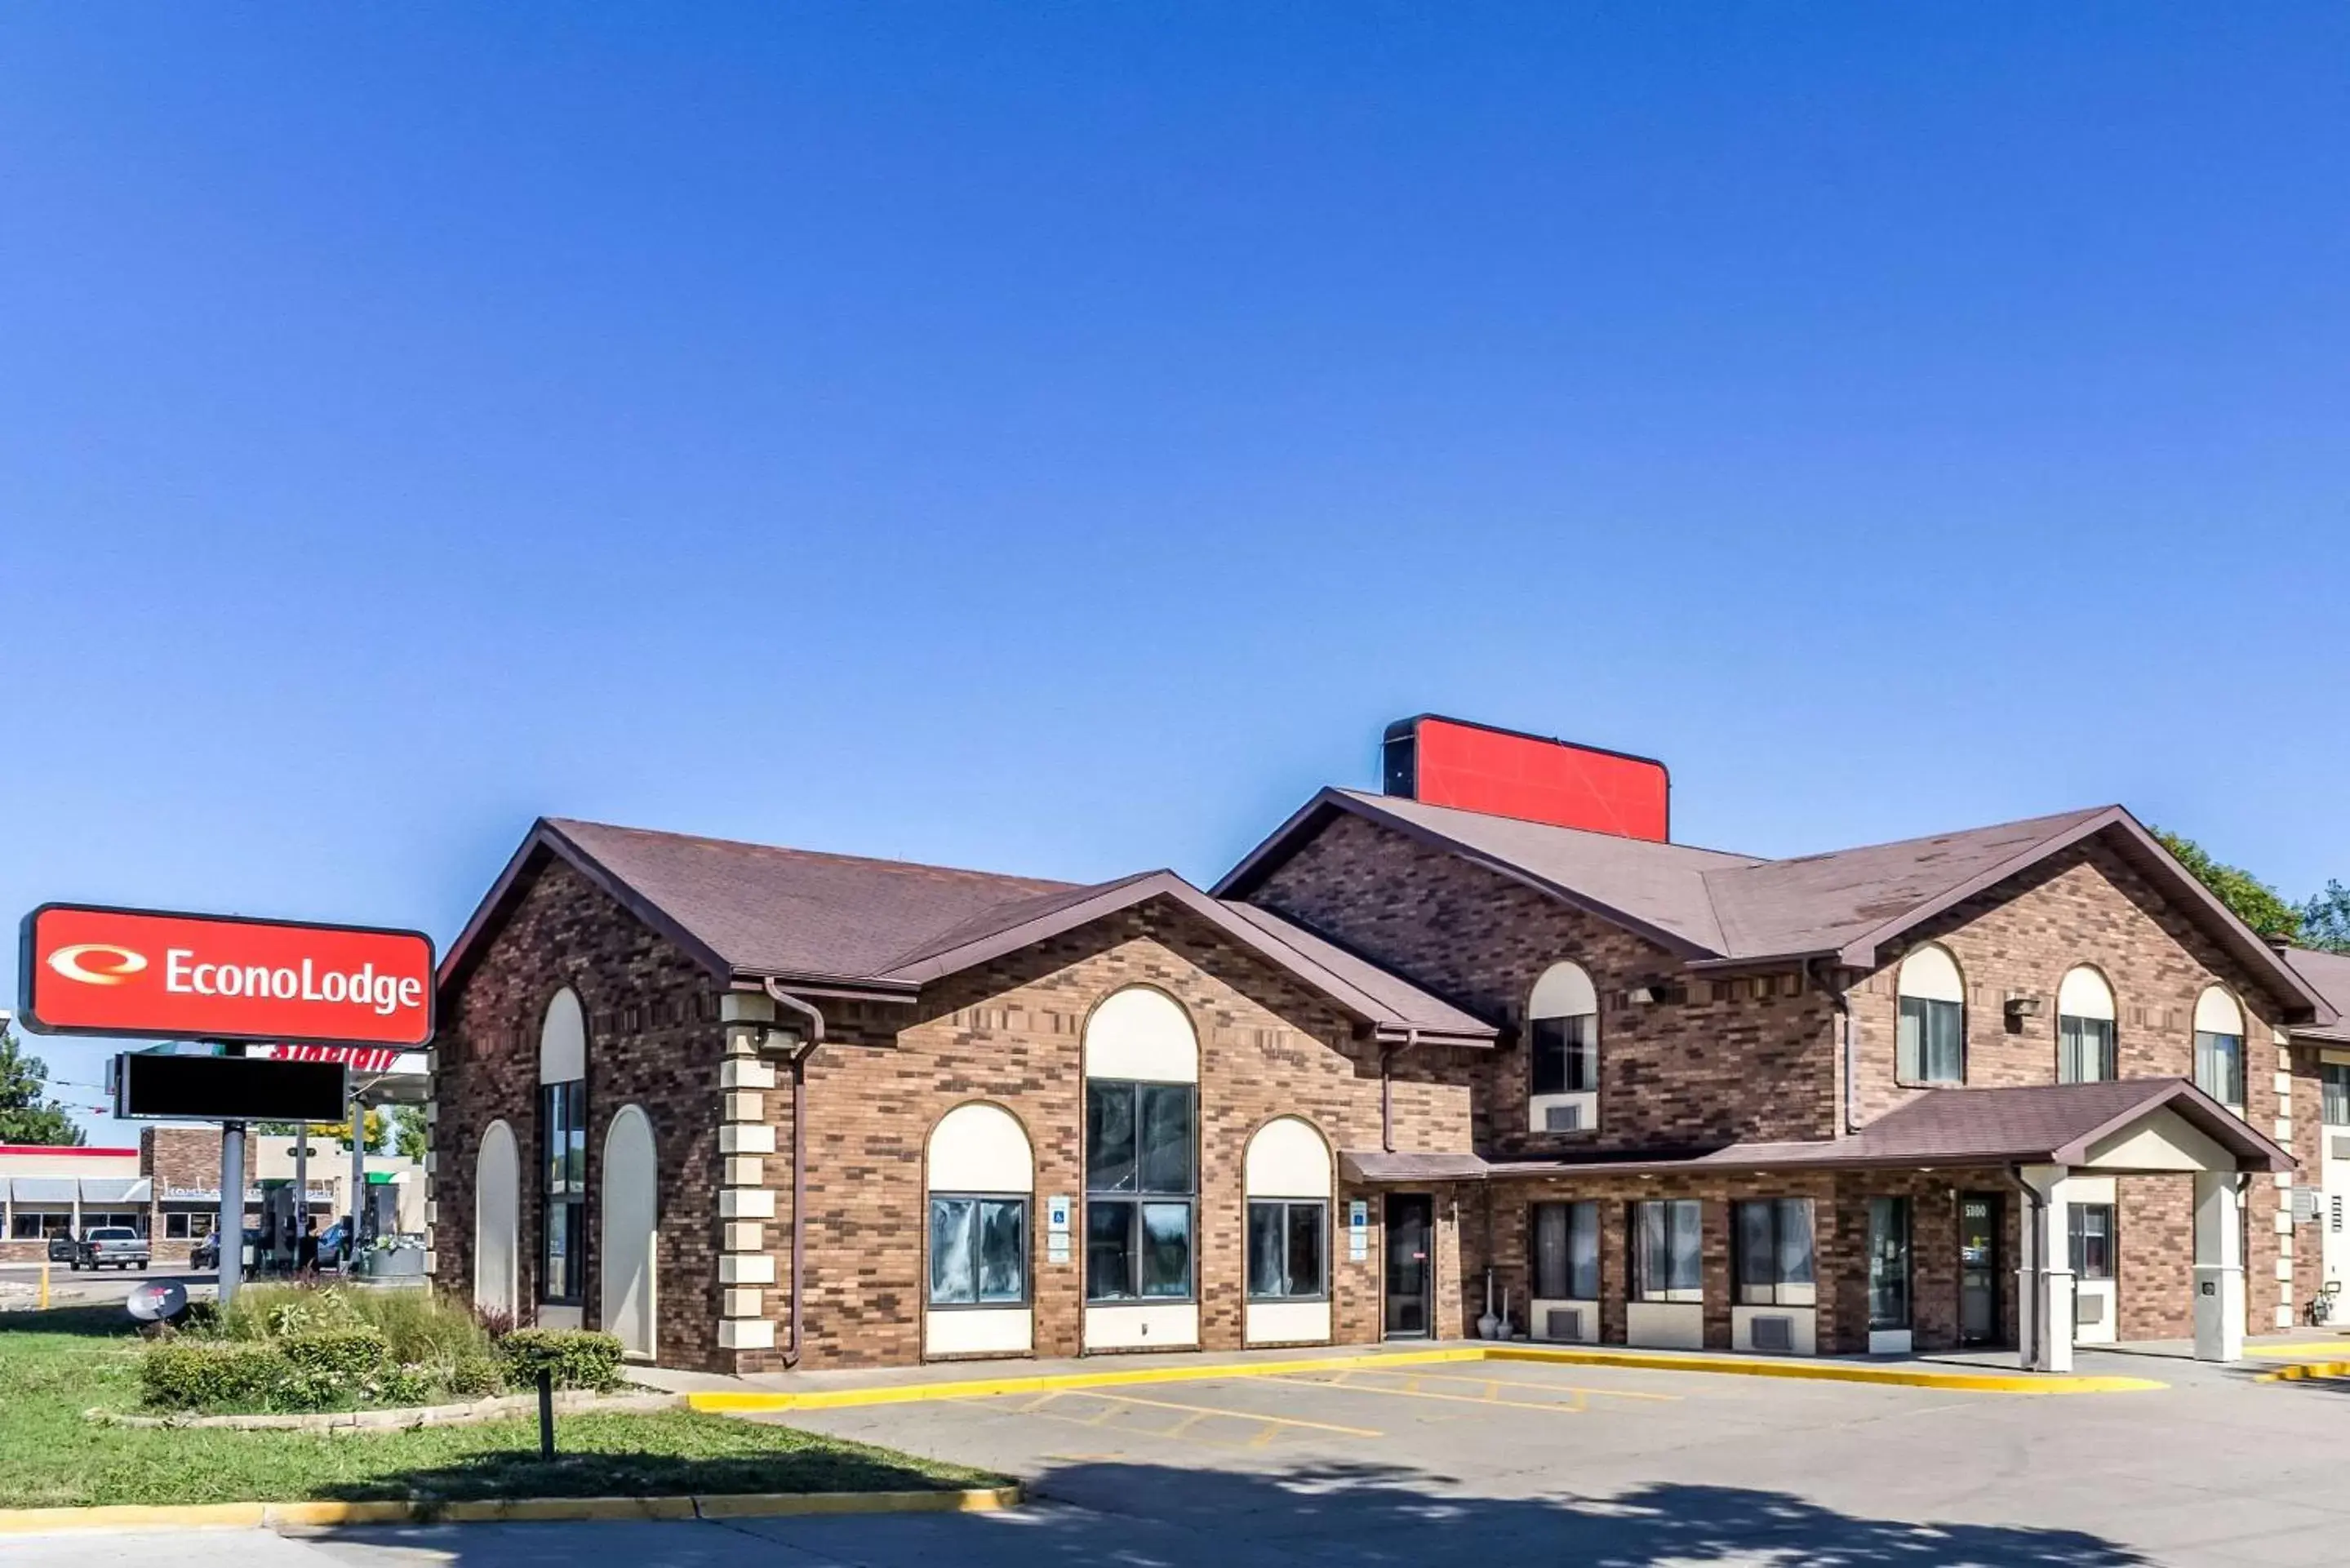 Property building in Econo Lodge North Sioux Falls